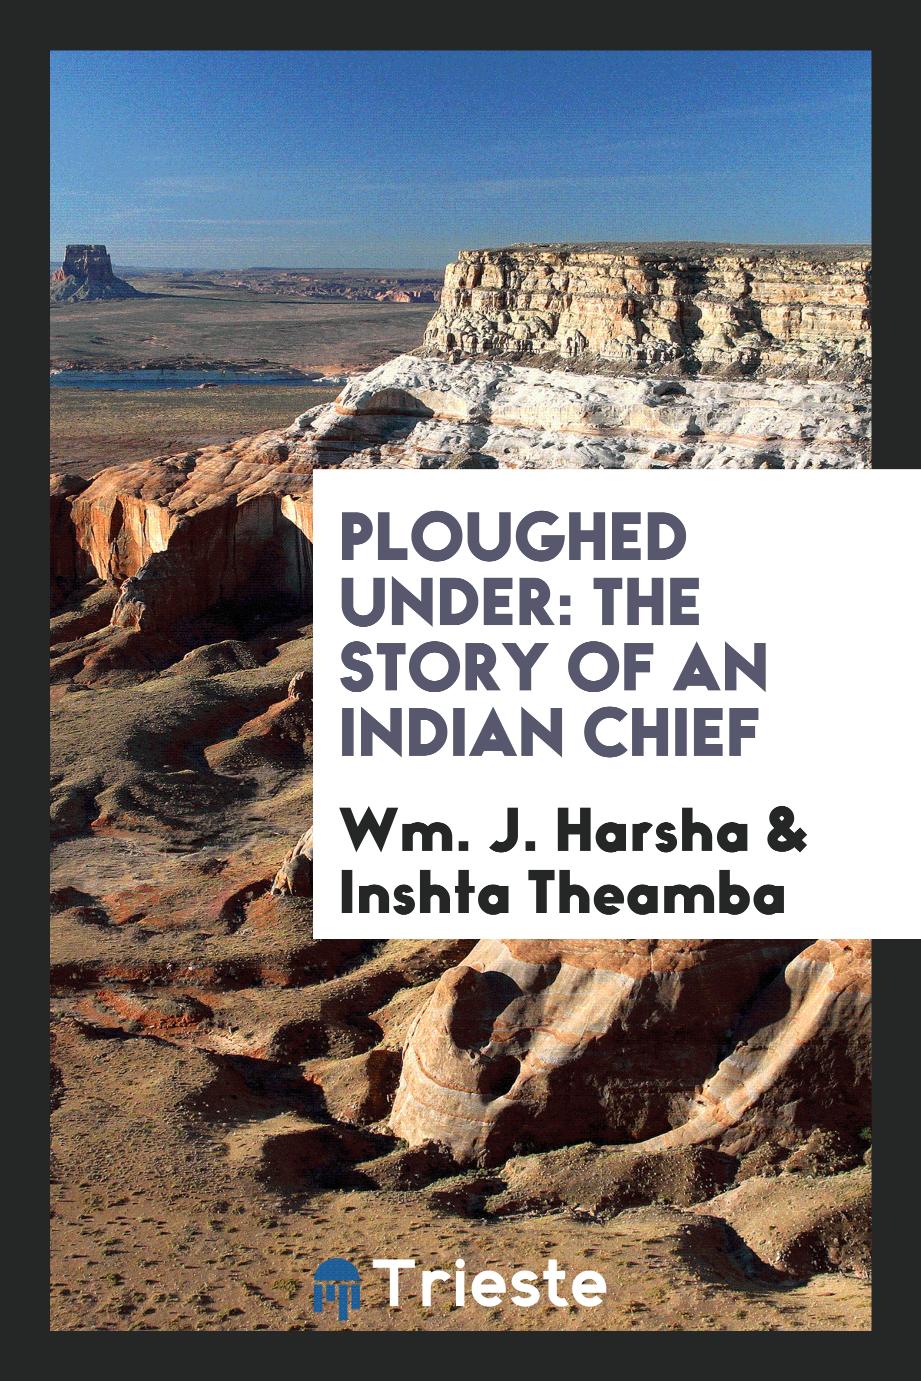 Ploughed under: the story of an Indian Chief